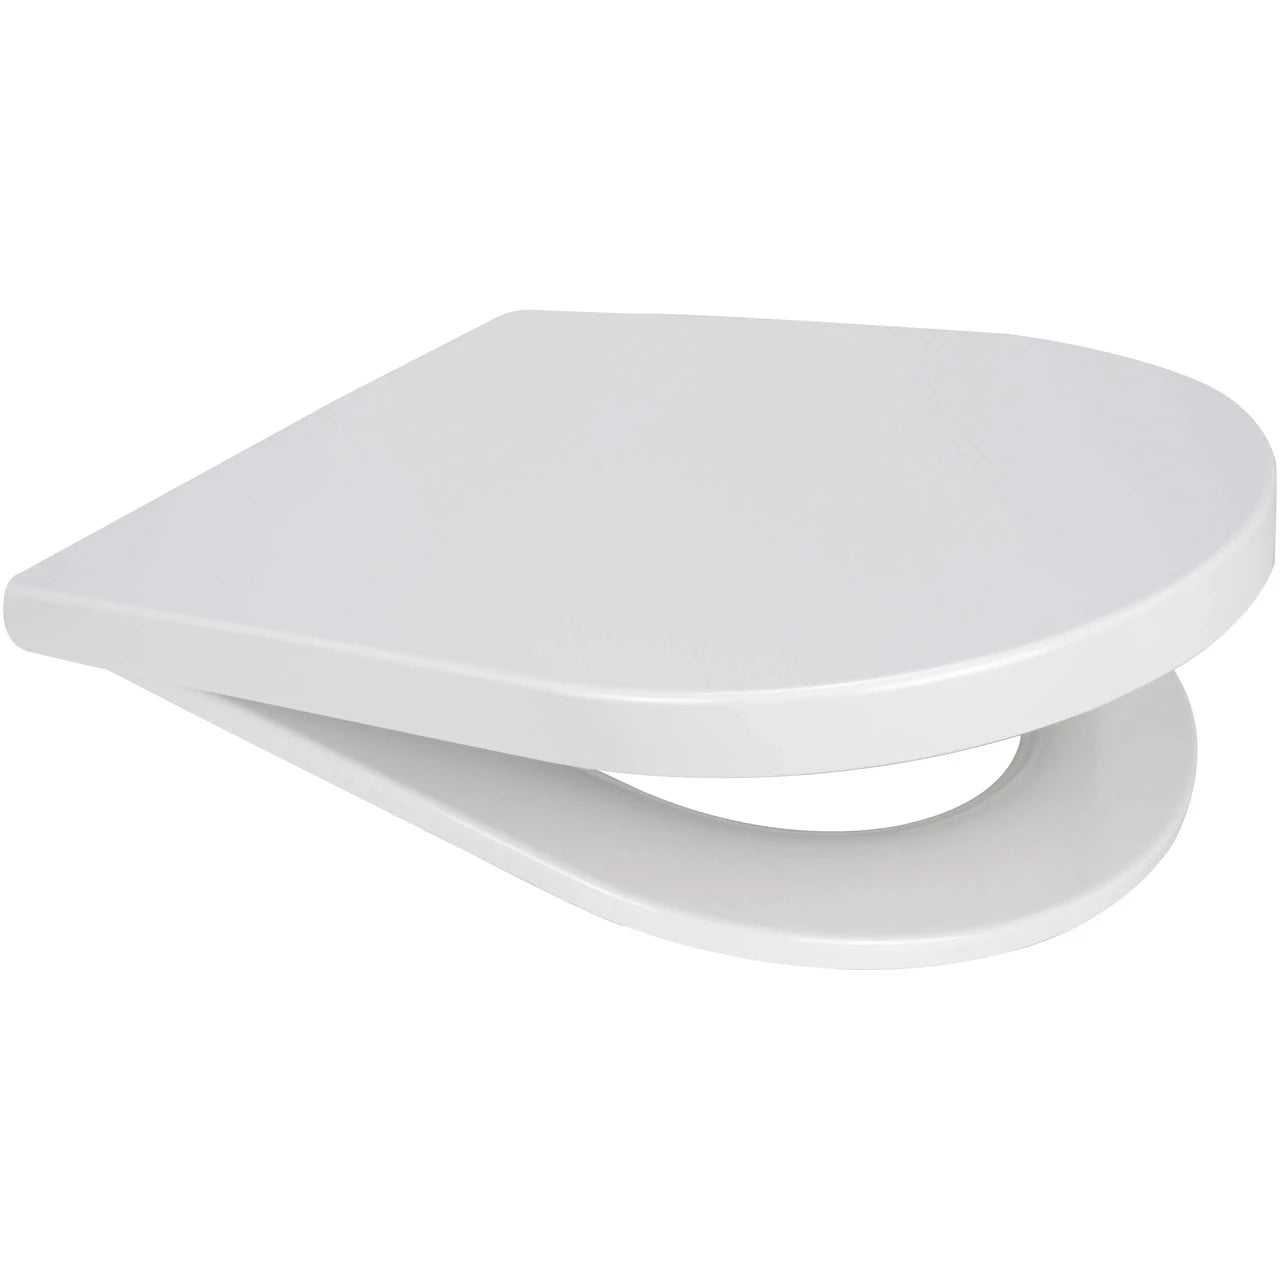 Middle D Style Euroshowers Toilet Seat